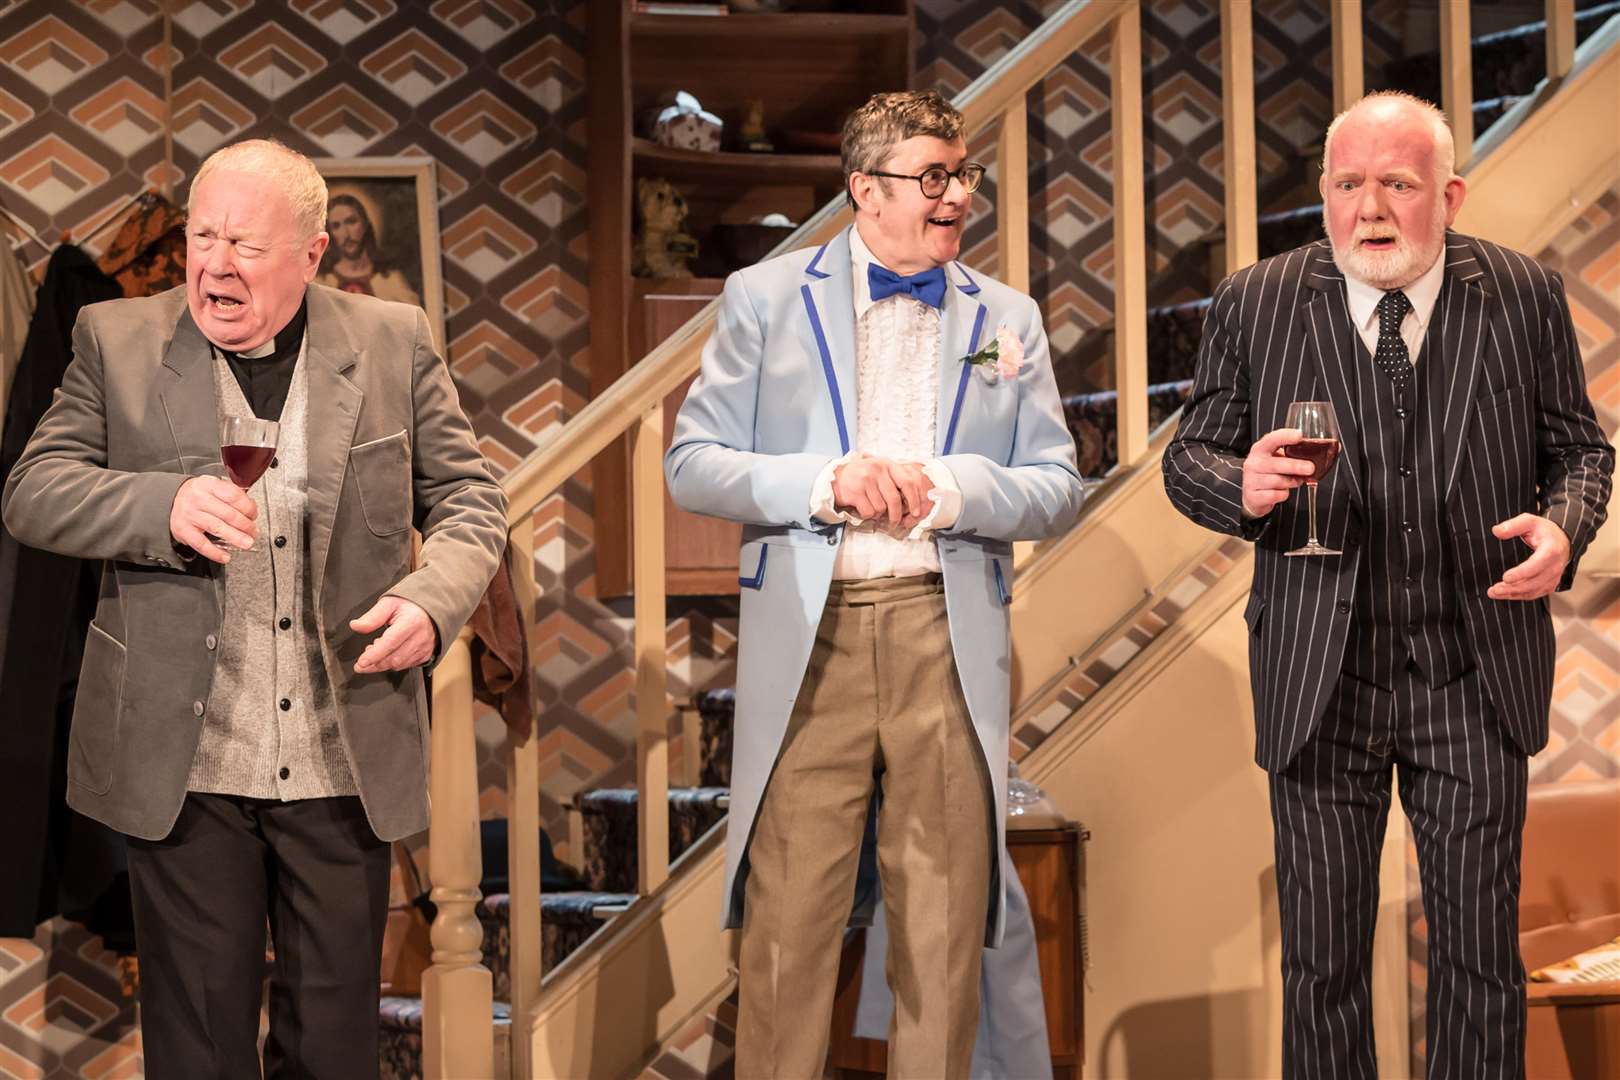 David Shaw-Parker, Joe Pasquale and Moray Treadwell in Some Mothers Do 'Ave 'Em